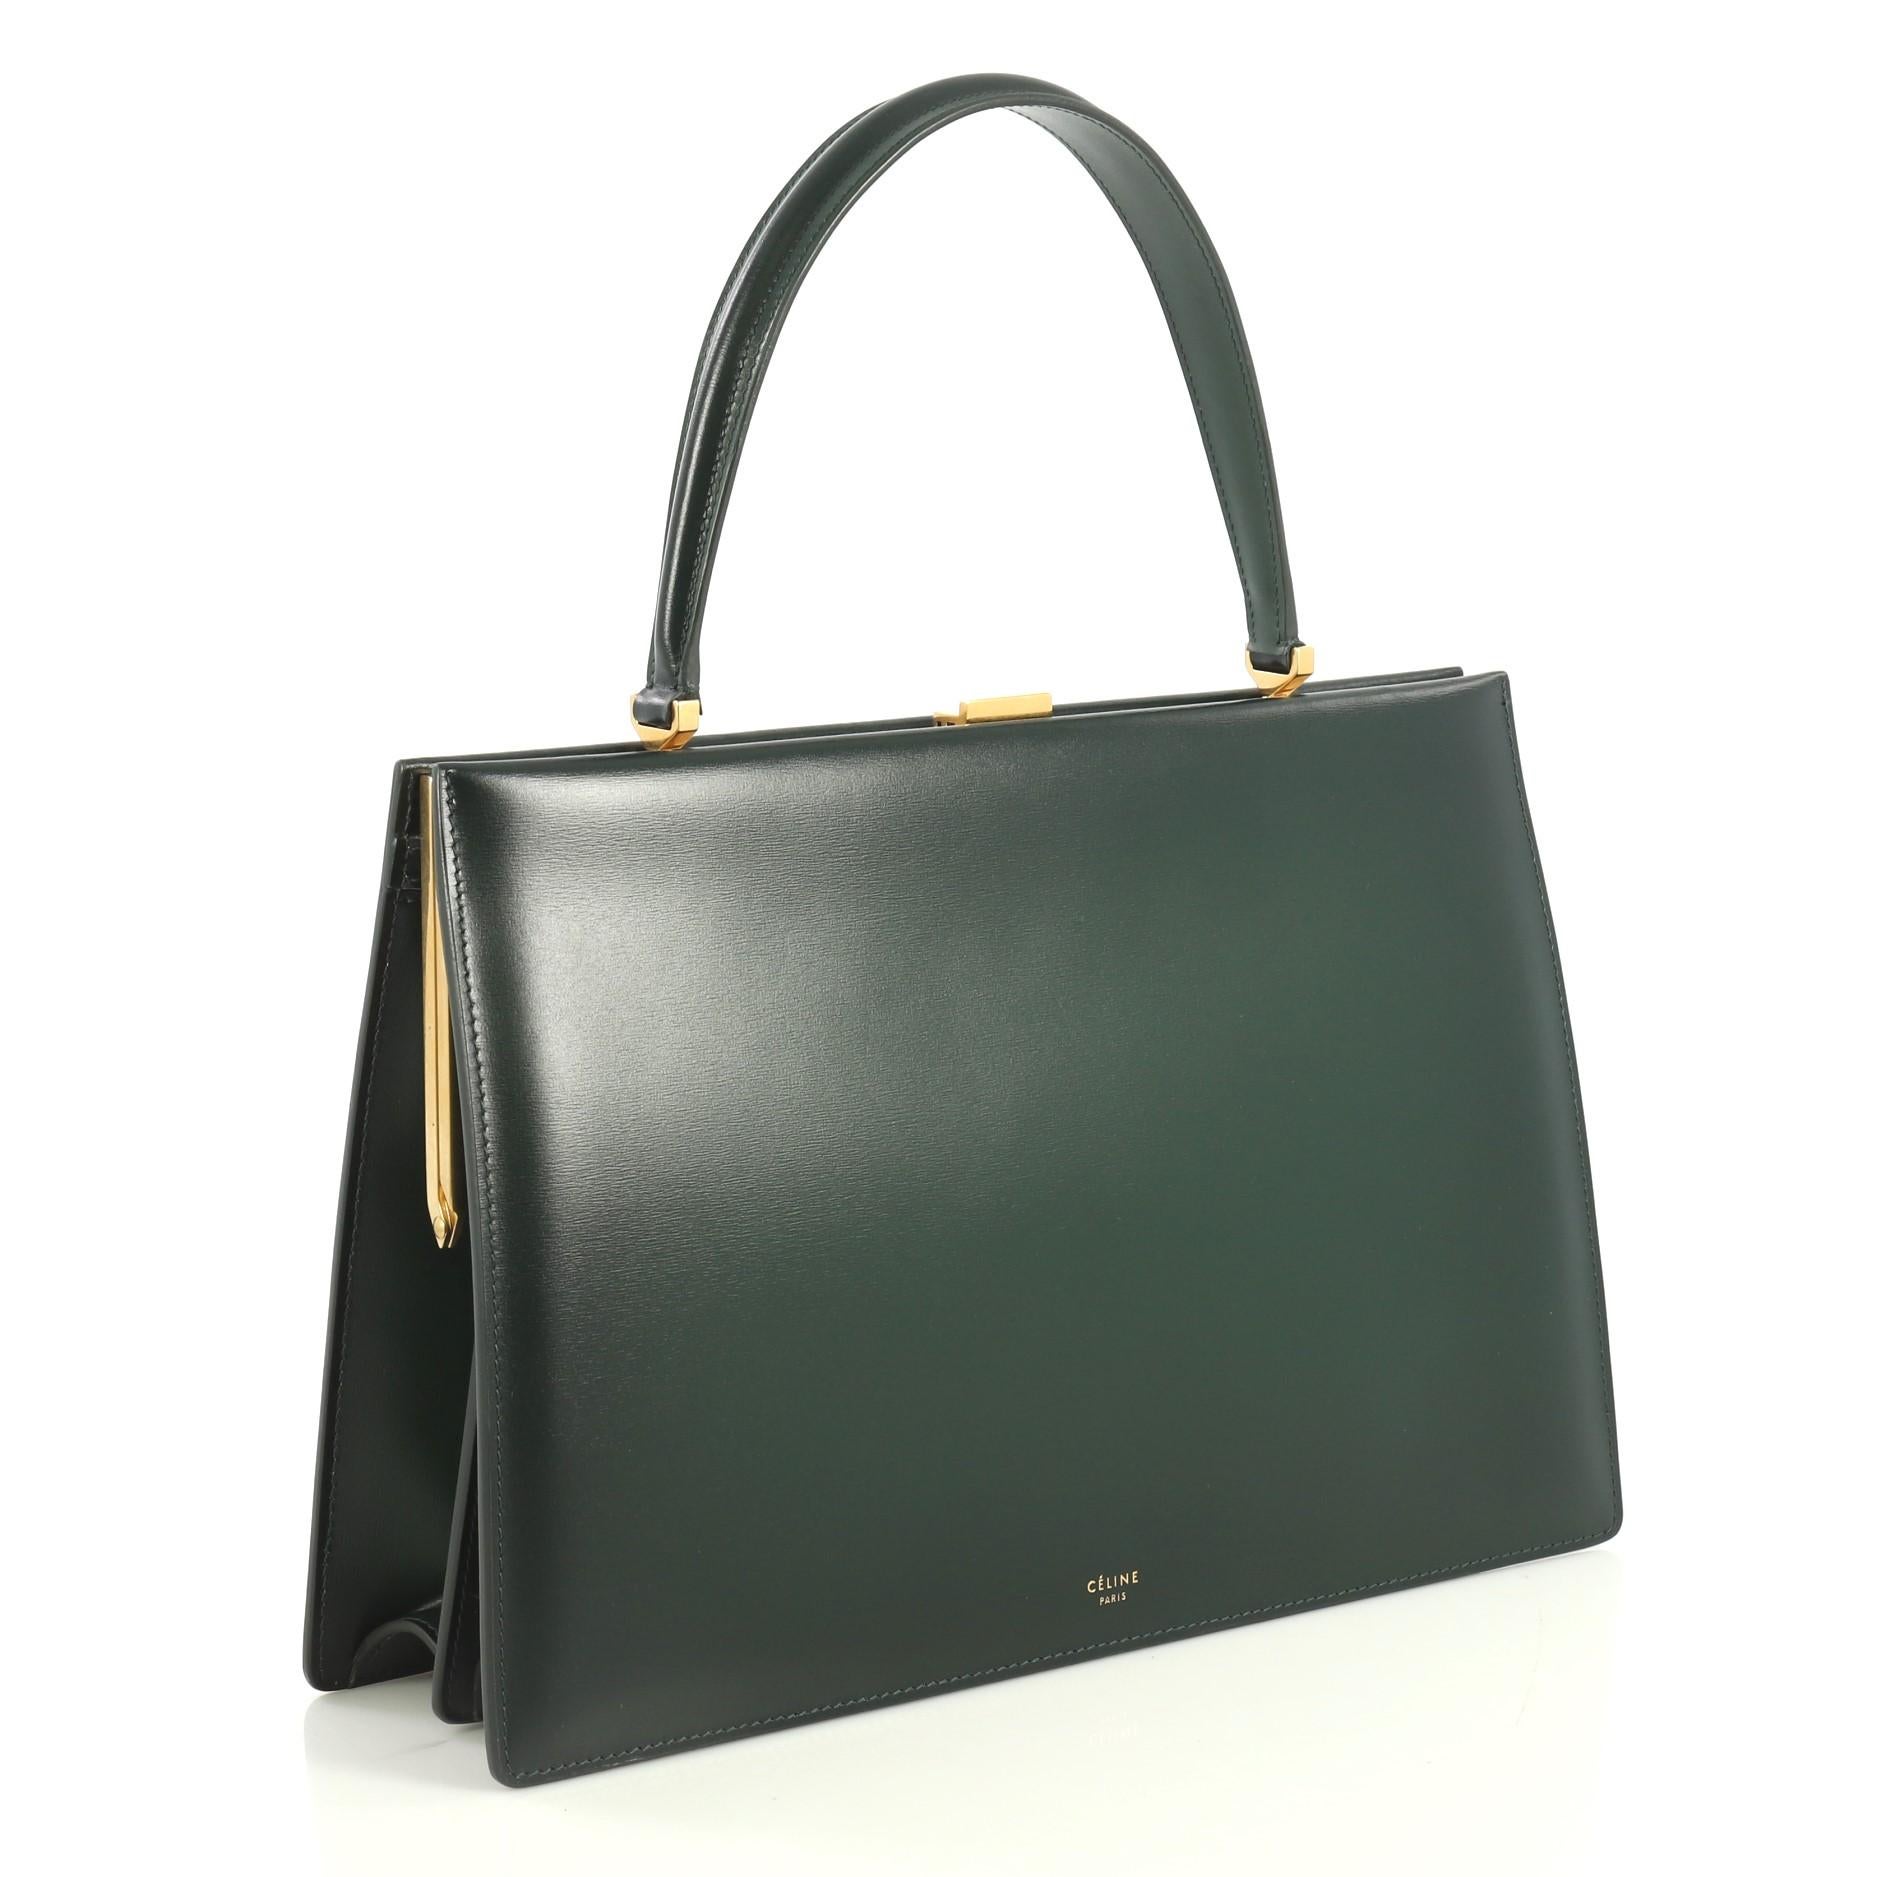 This Celine Clasp Top Handle Bag Leather Medium, crafted in green leather, features a leather top handle, stamped Celine logo, framed top, and aged gold-tone hardware. Its clasp closure opens to a purple leather interior divided into two